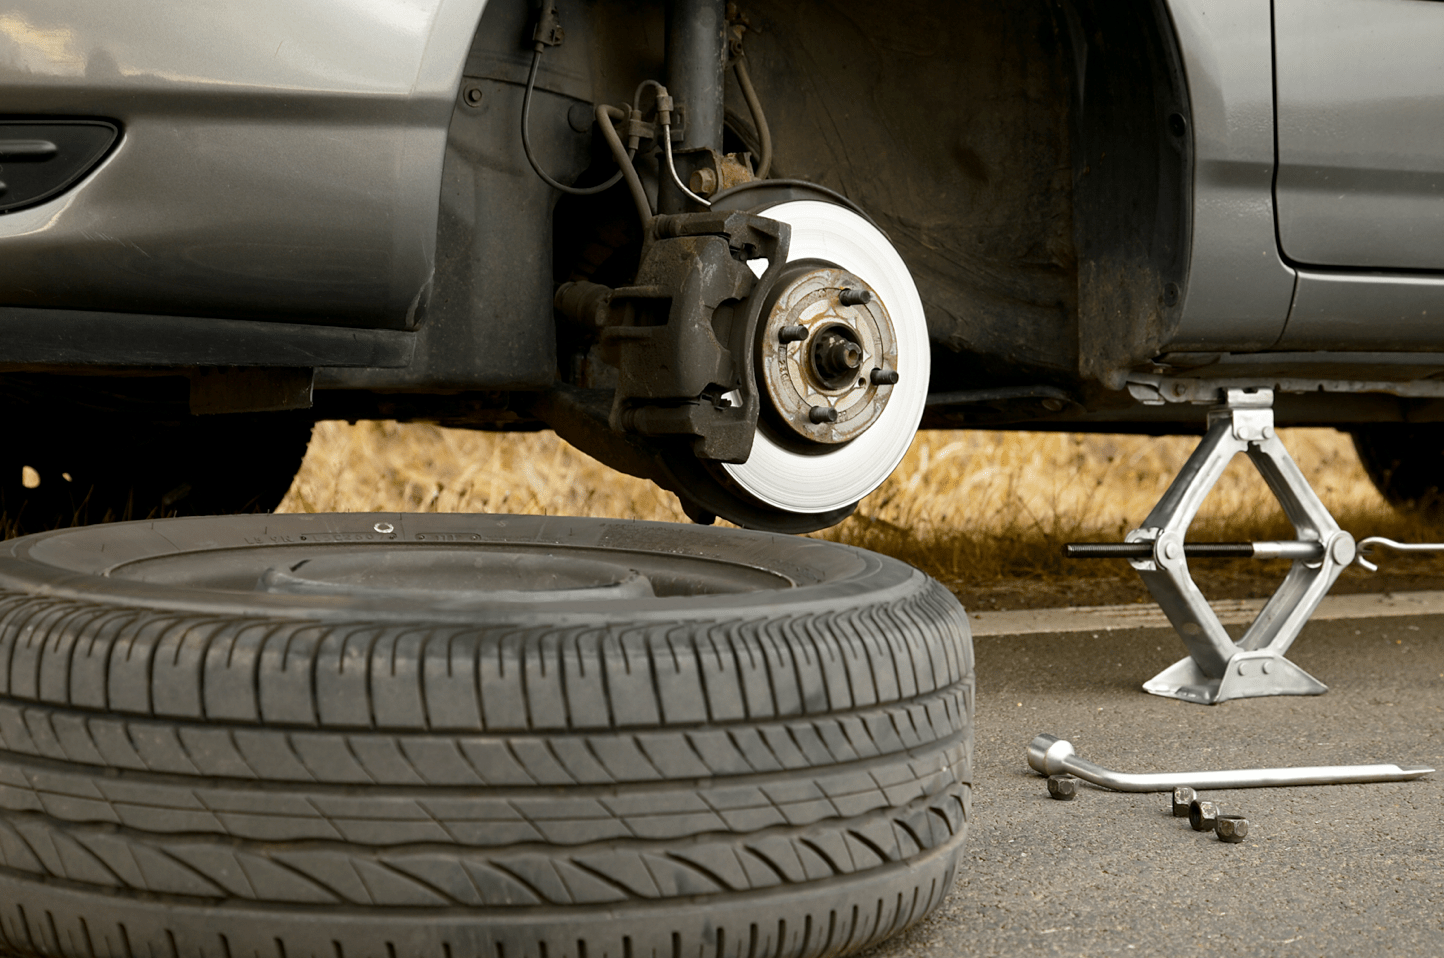 How to Change a Tire in a Few Minutes: Step